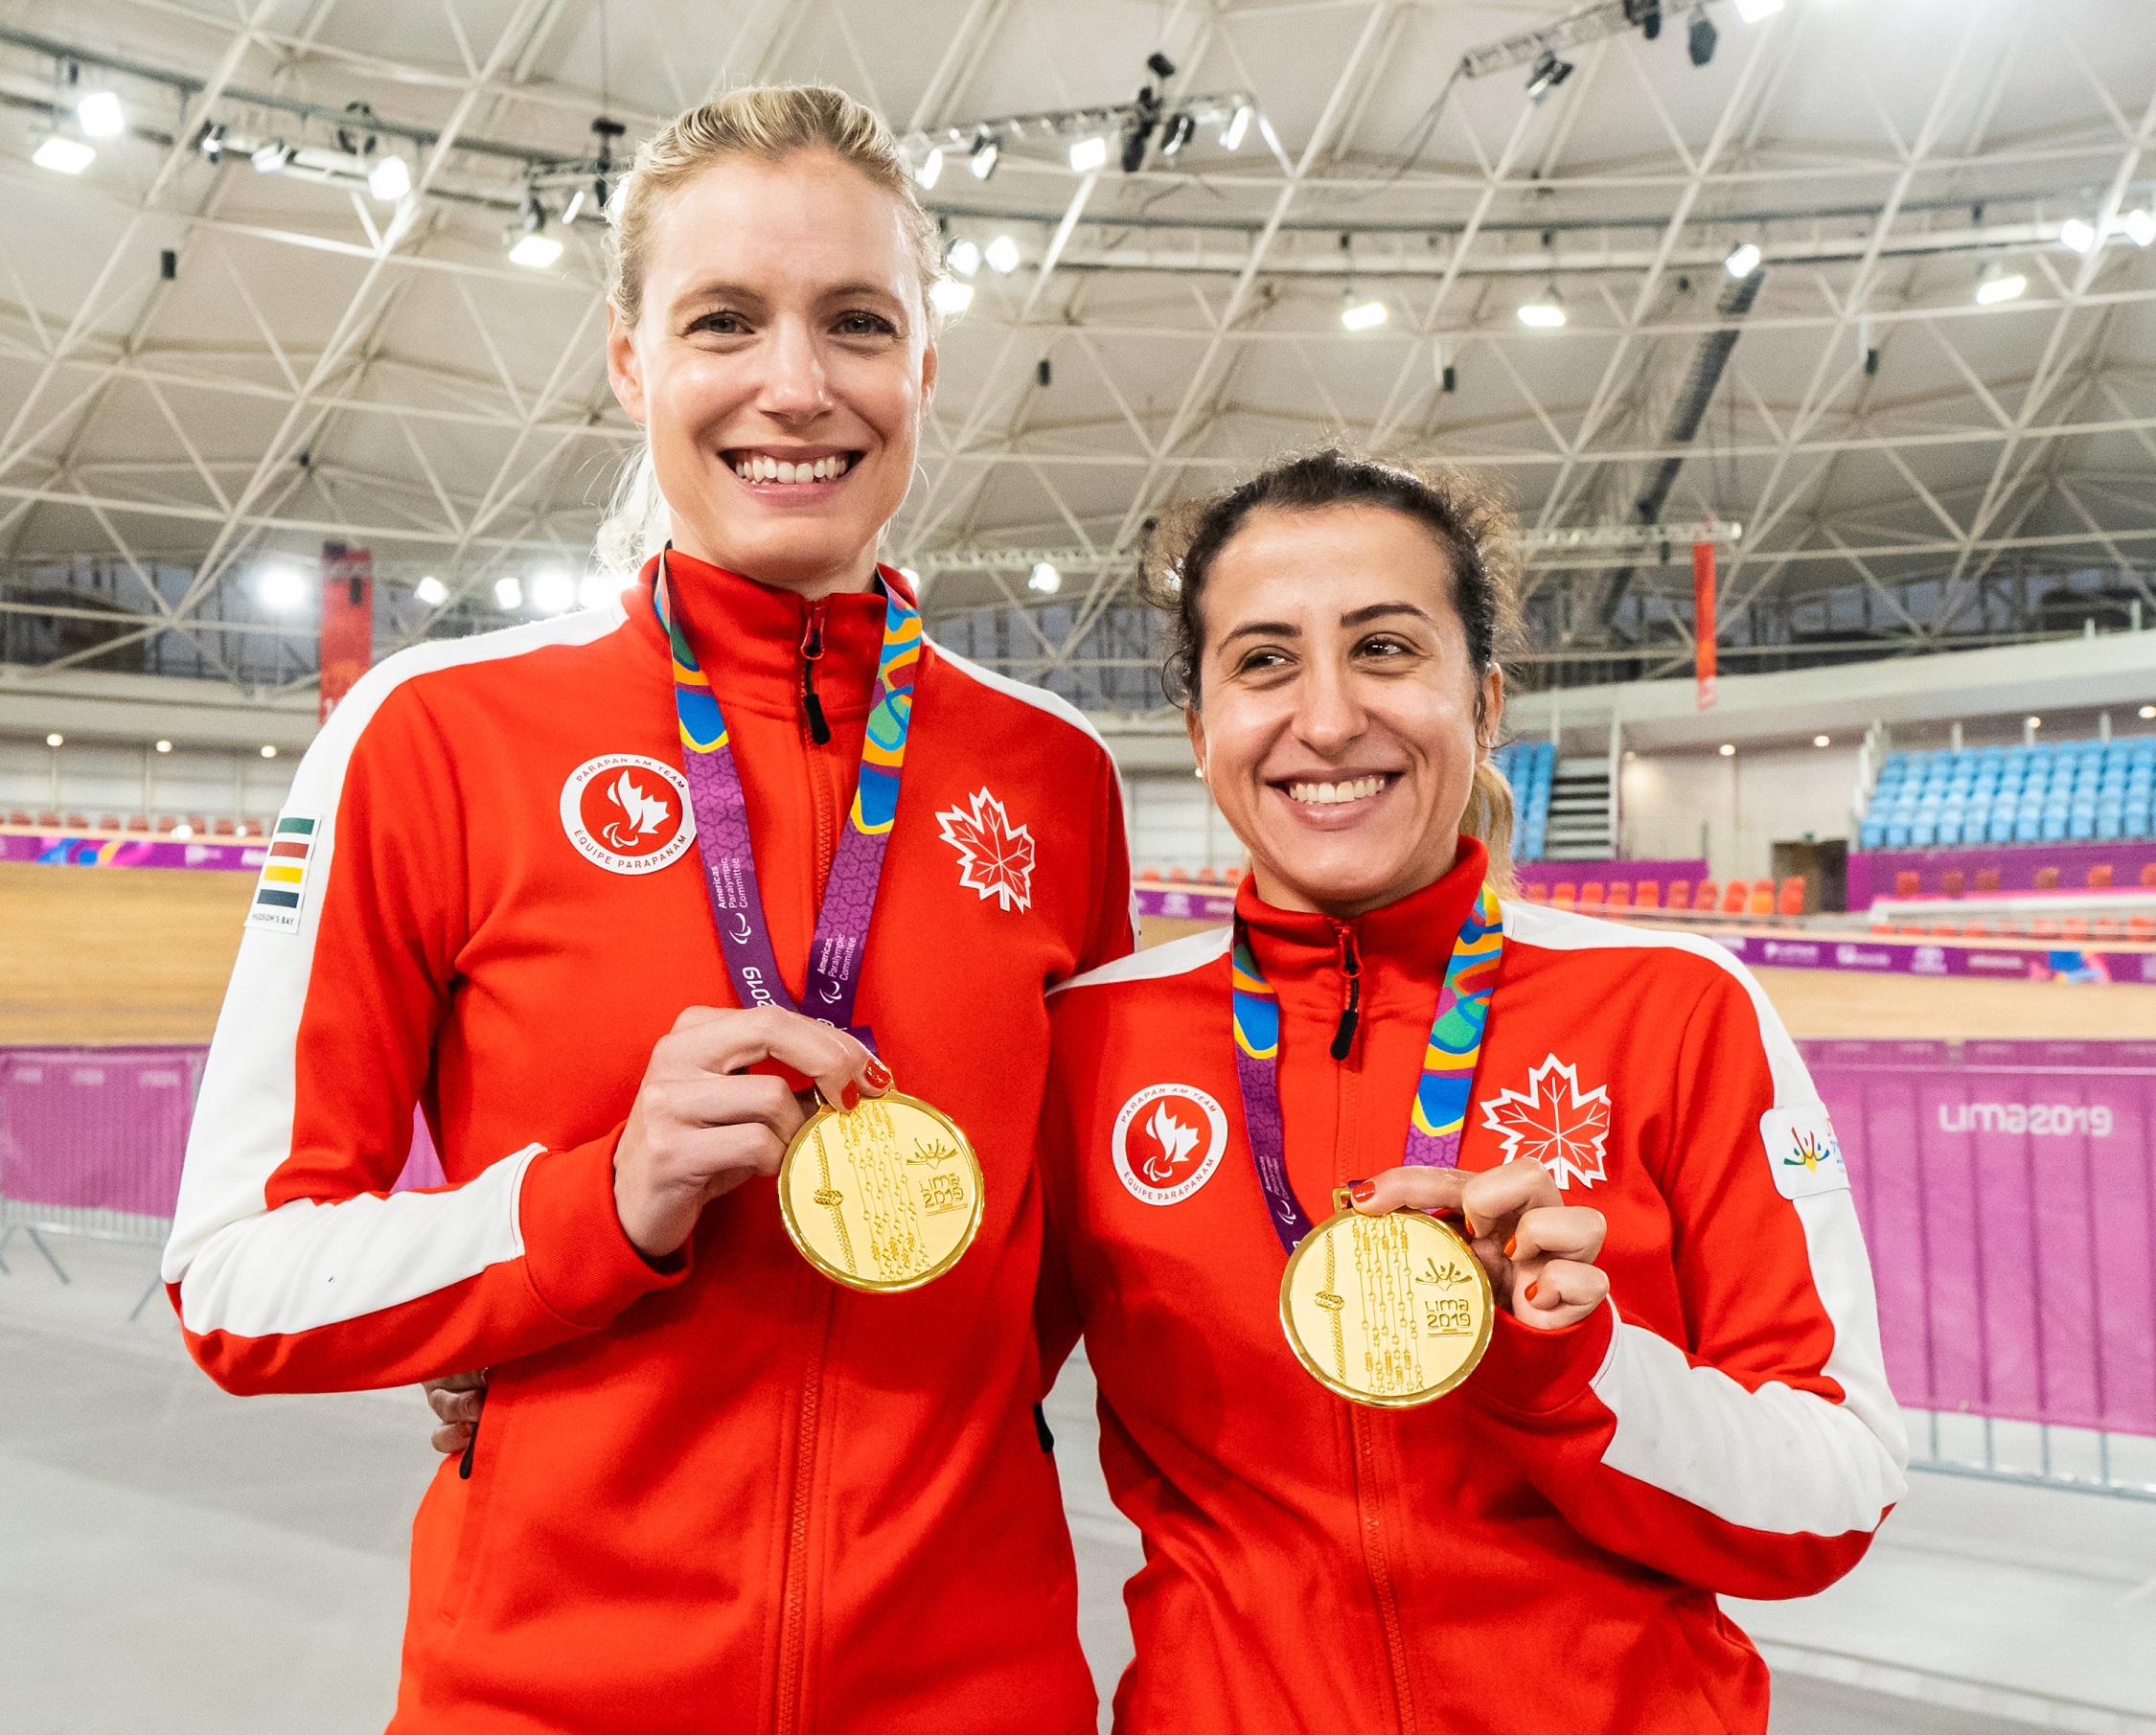 Carla Shibley (right) and her pilot Meghan Lemiski (left) with their gold medals.